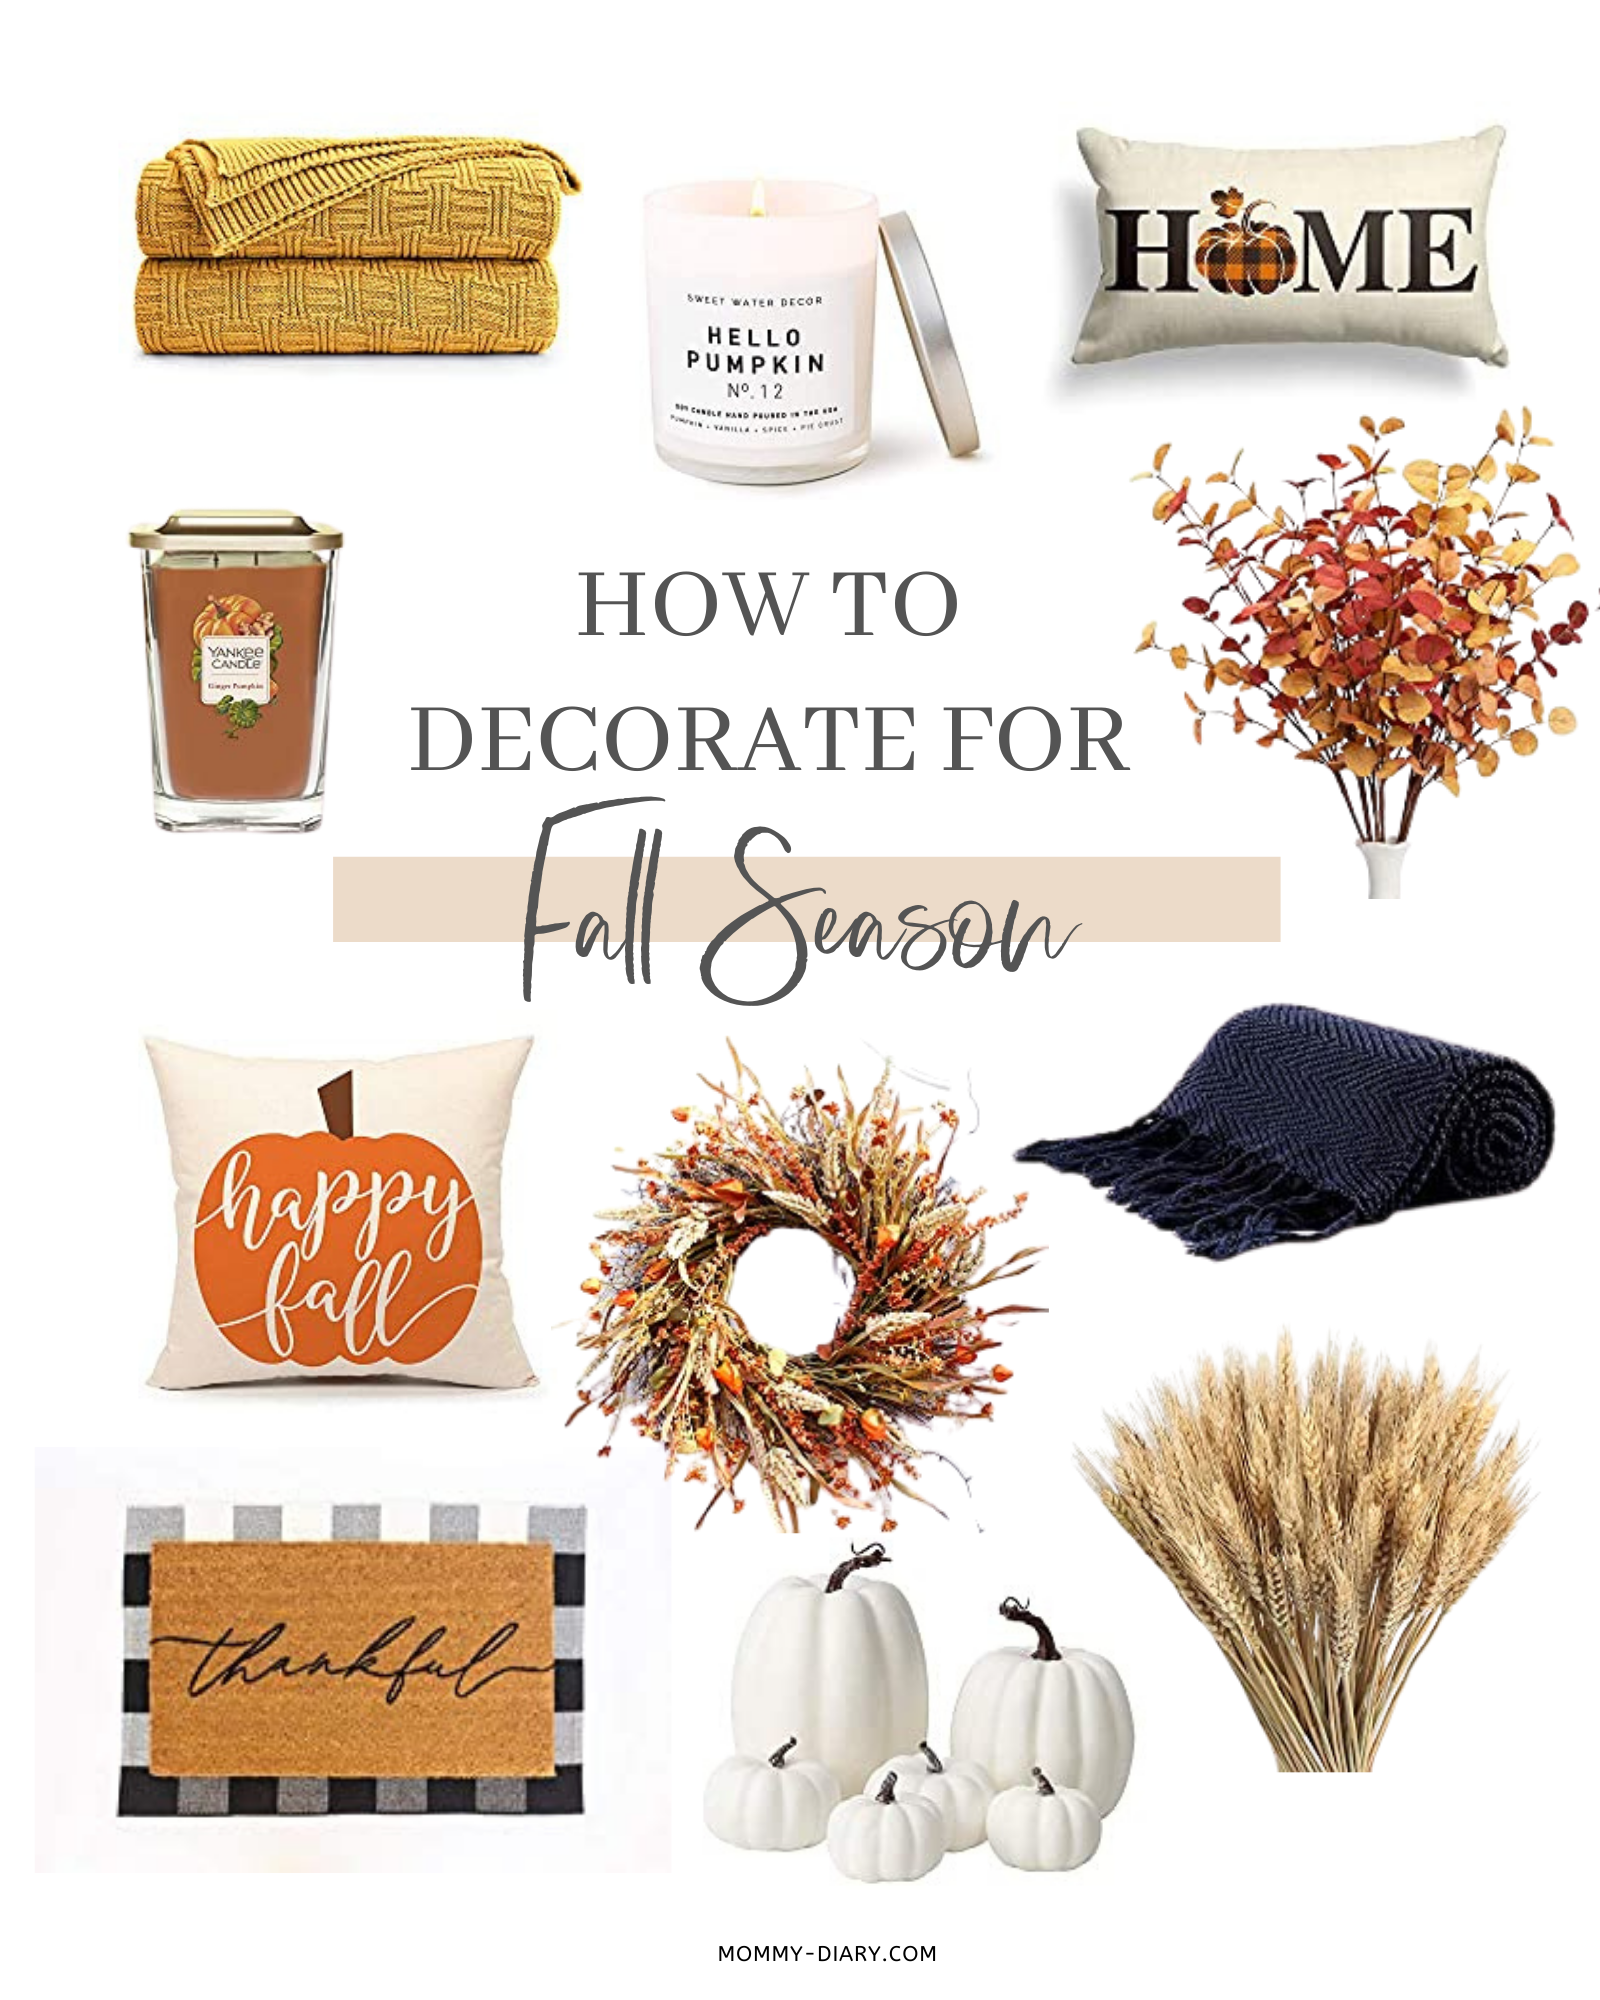 How to Decorate for Fall Season